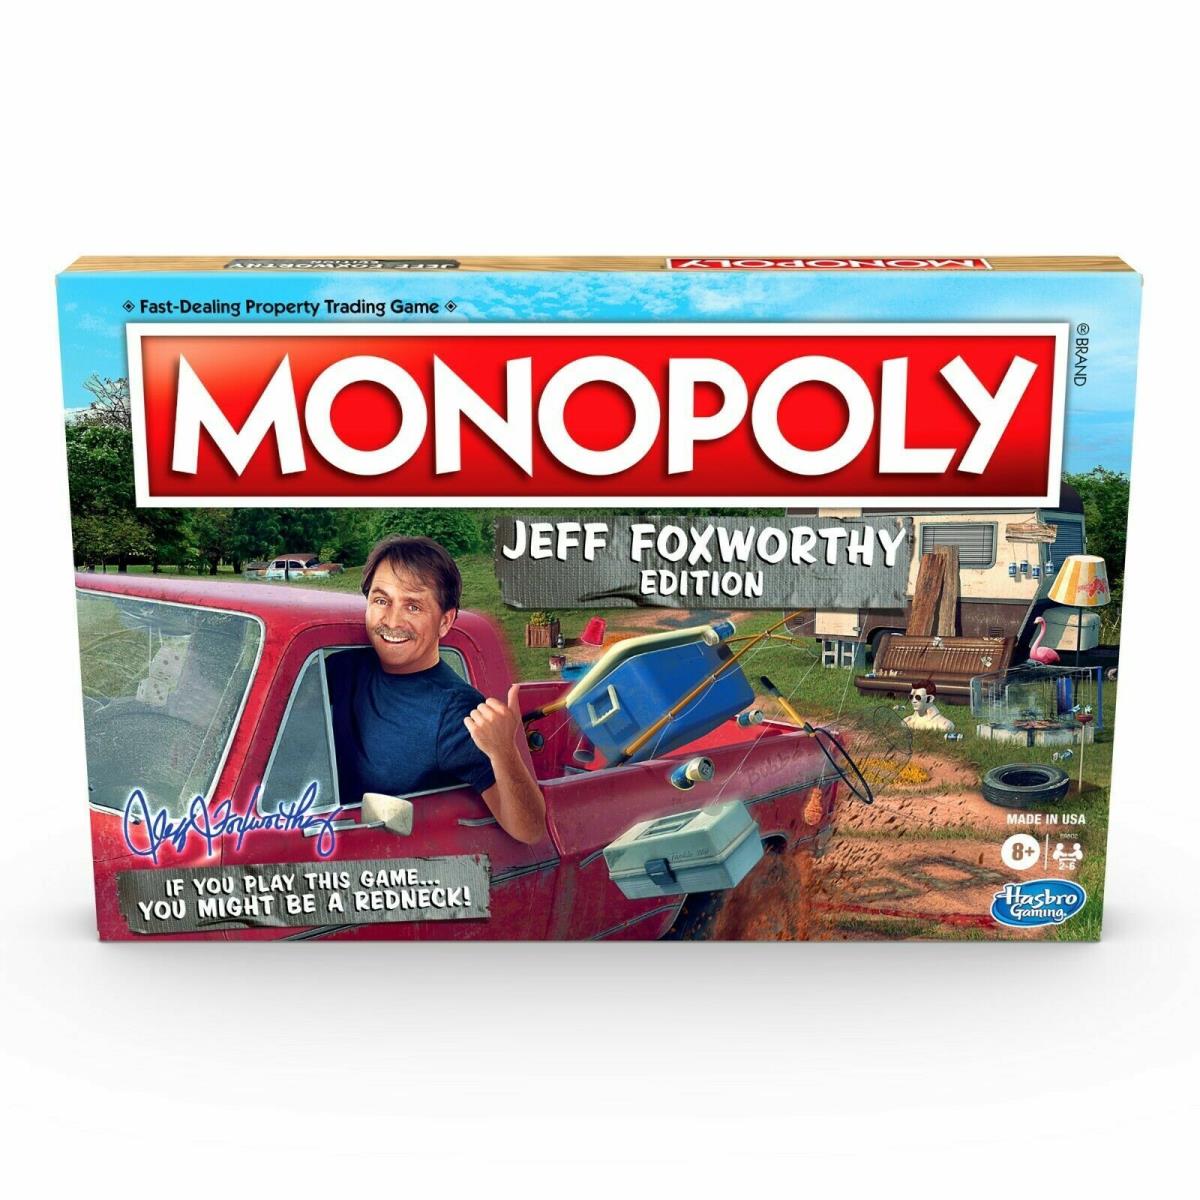 Jeff Foxworthy Monopoly Game You Might Be a Redneck 2020 Board Game